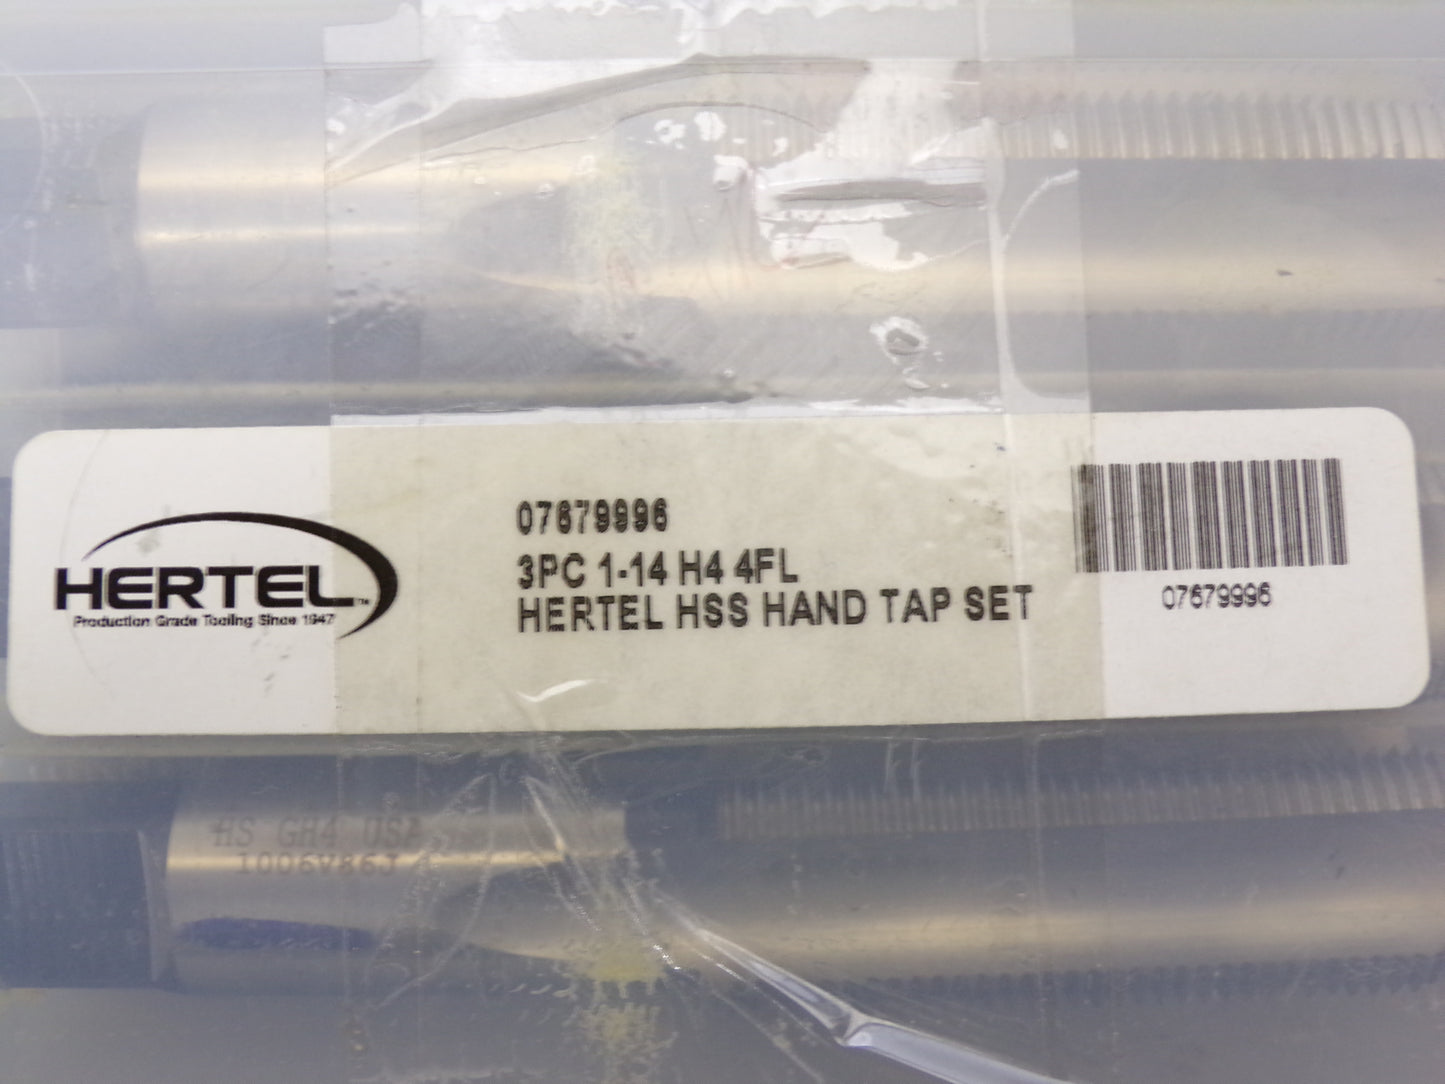 Hertel 1-14 UNS, 4 Flute, Bottoming, Plug & Taper, Bright Finish, High Speed Steel Tap Set Right Hand Cut, 5-1/8" OAL, 2-1/2" Thread Length, 3B Class of Fit (CR00660-WTA16)